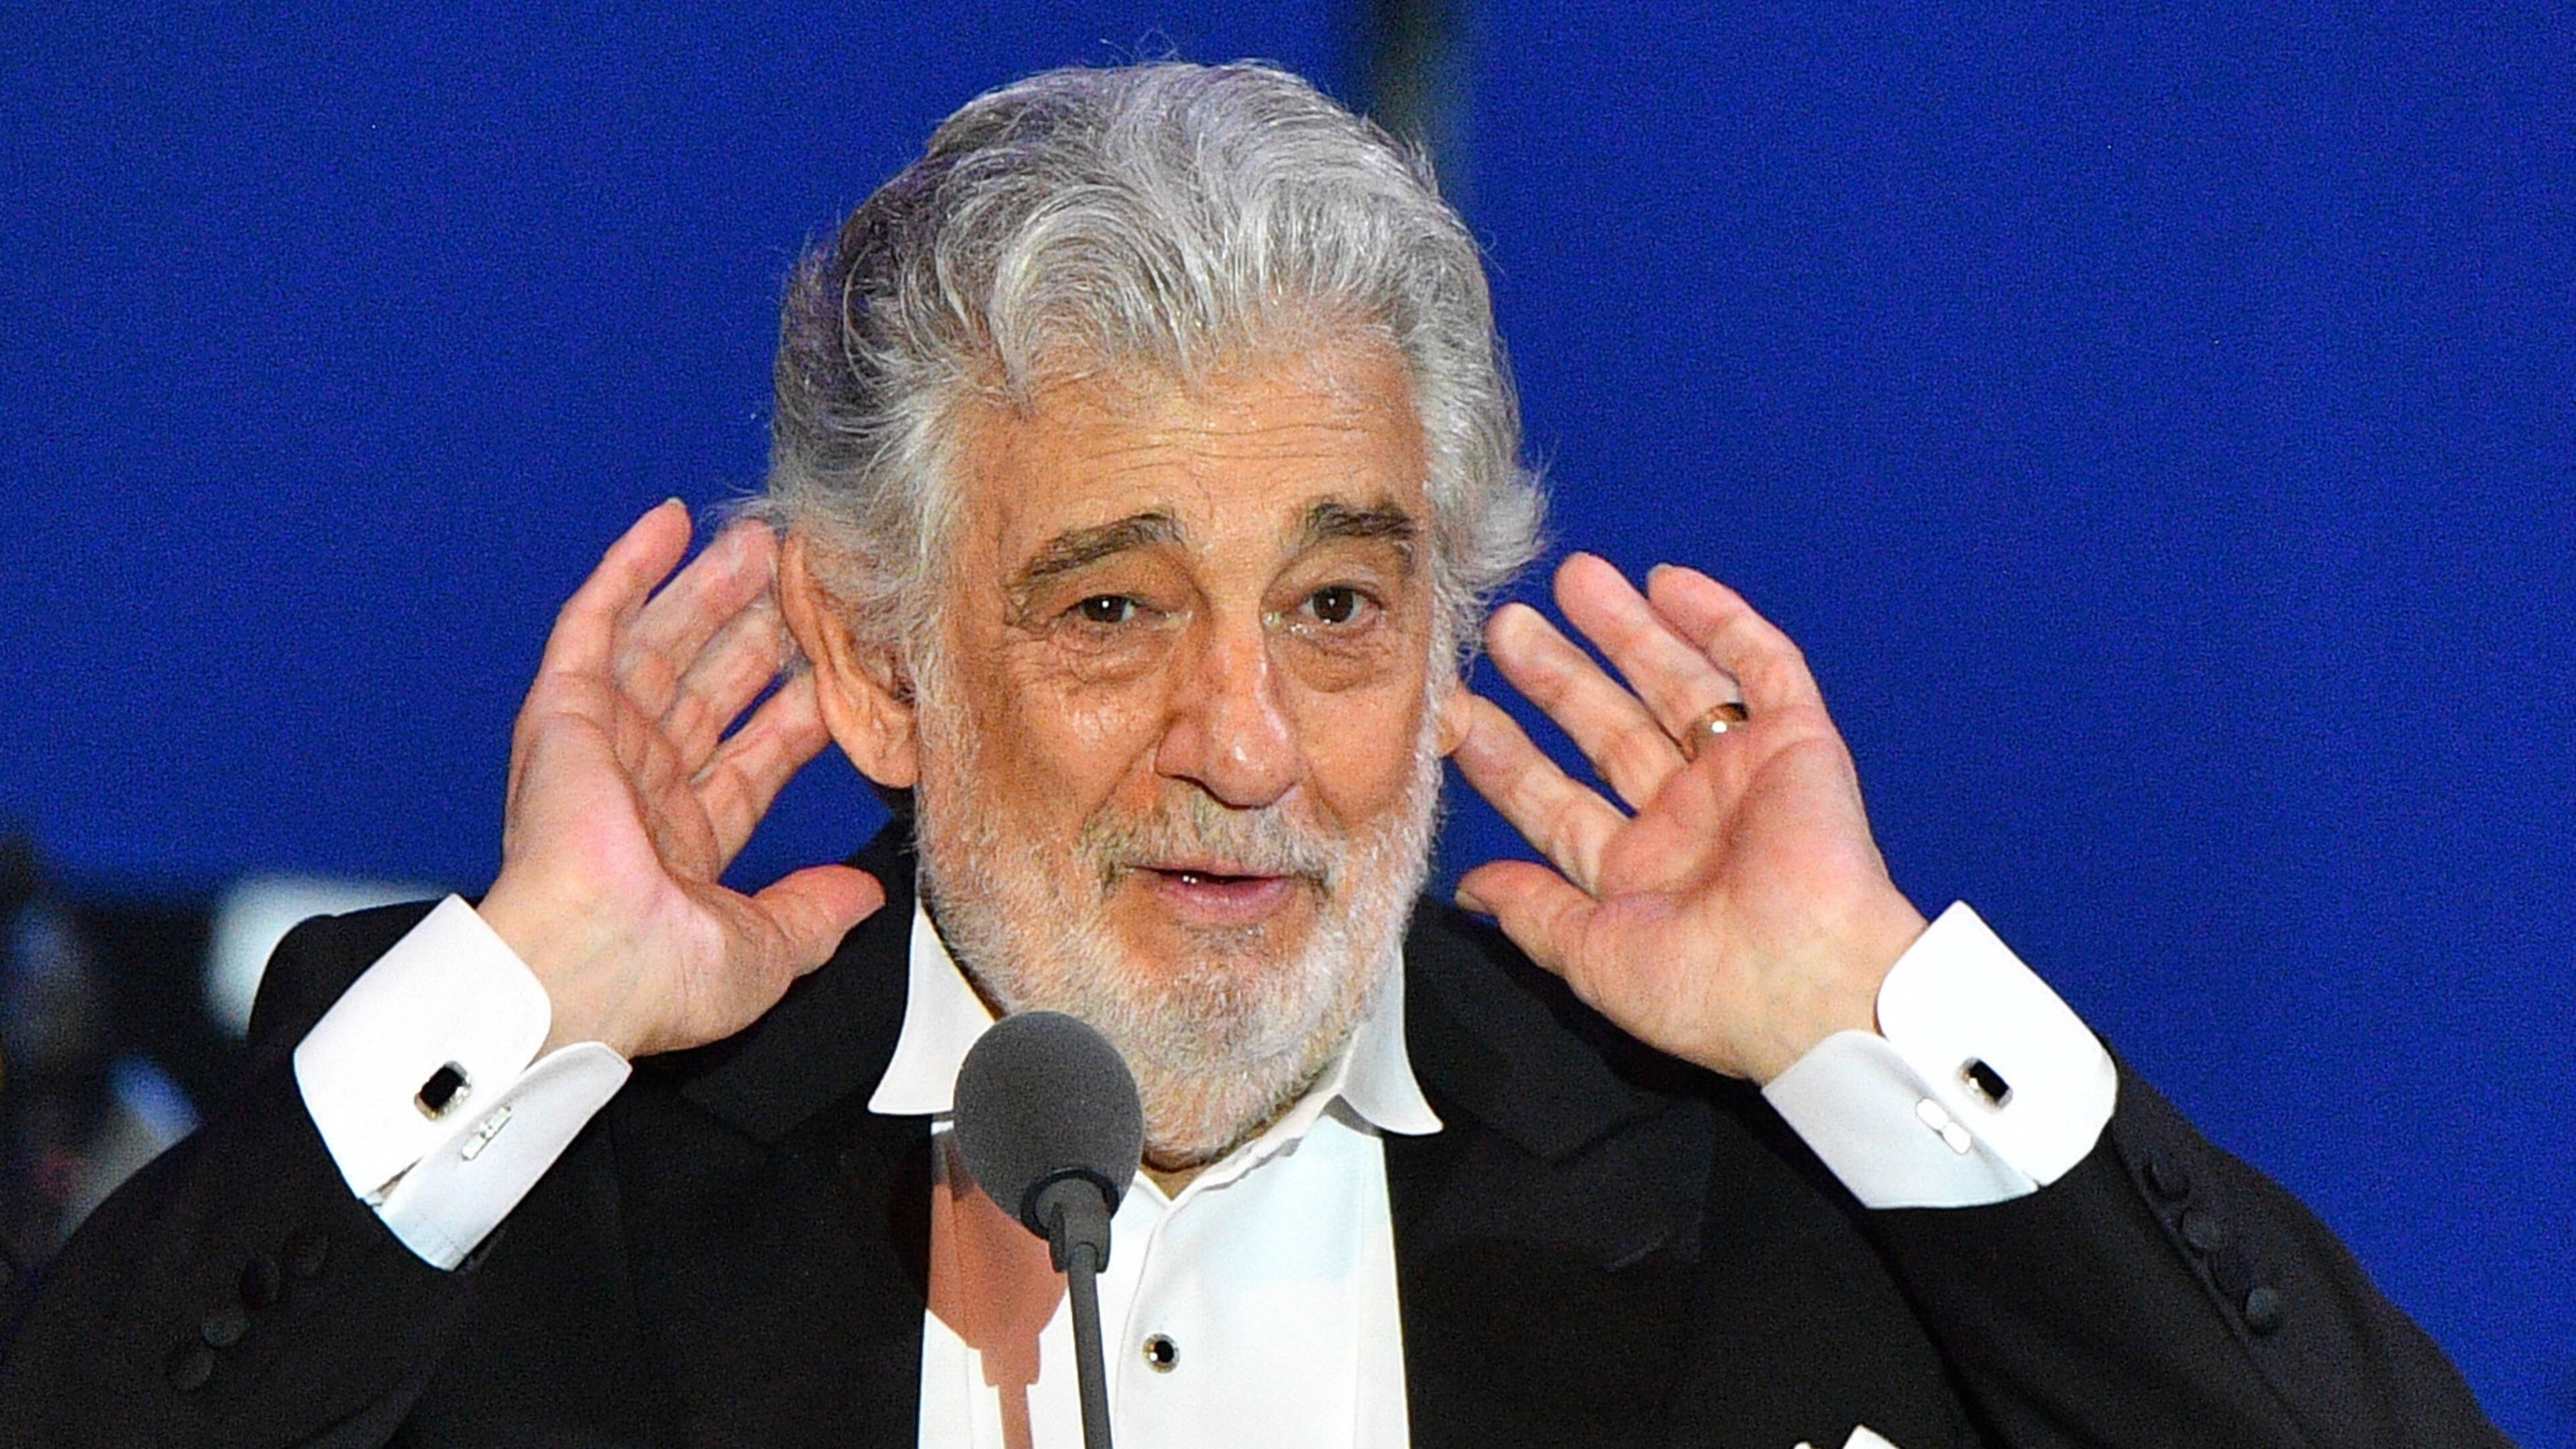 Placido Domingo, Additional accusations, Sexual misconduct claims, Ongoing controversy, 3840x2160 4K Desktop